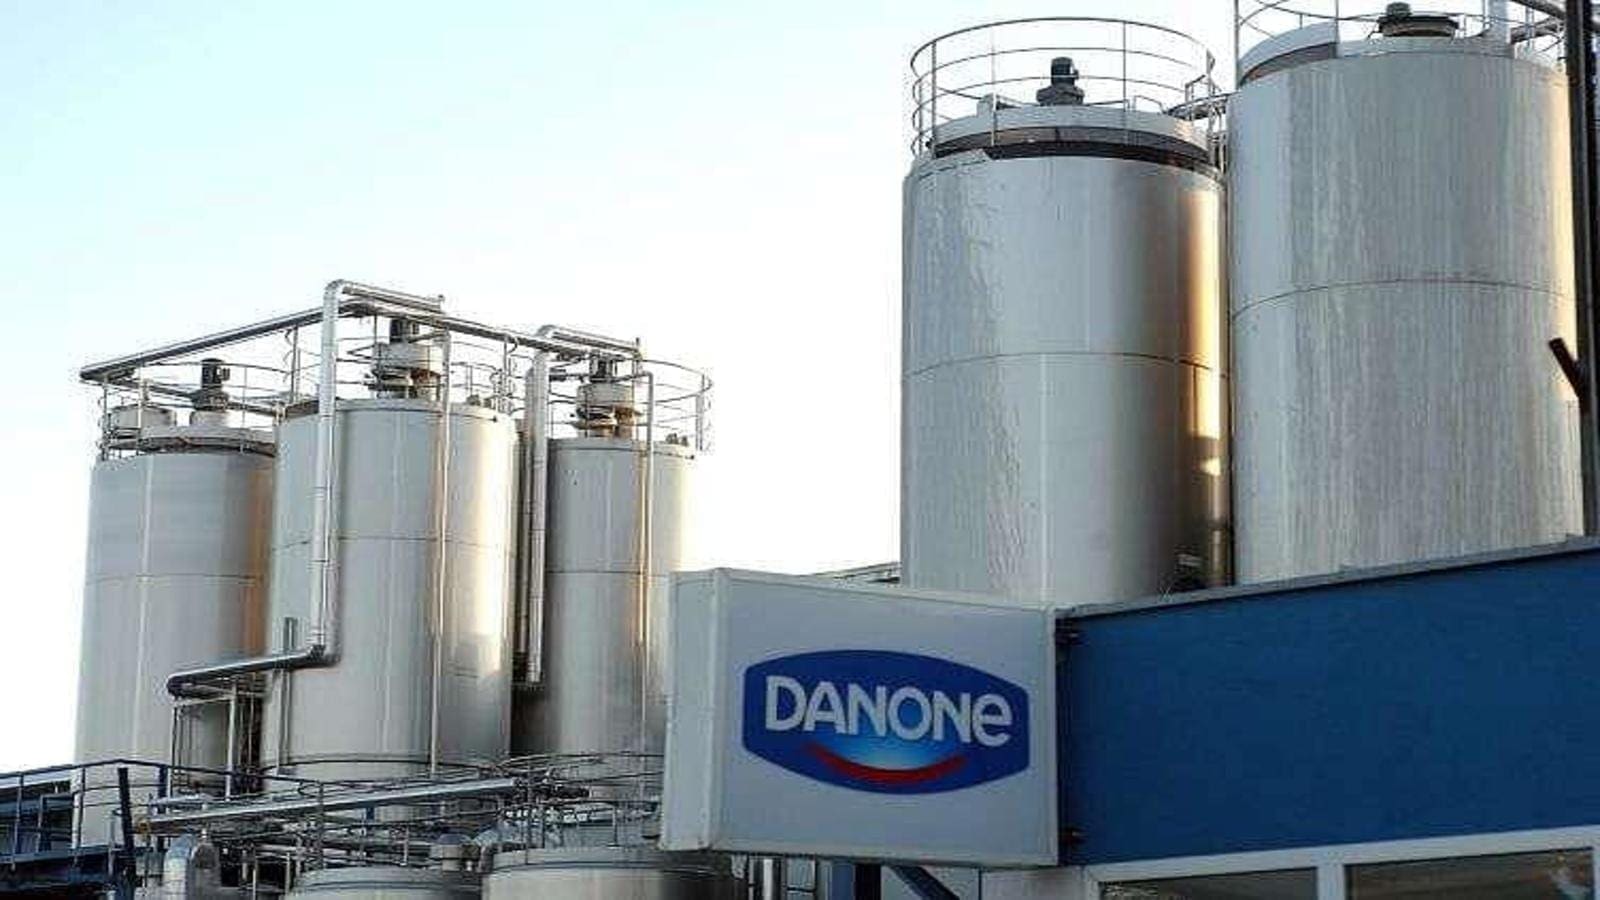 Danone bounces back to profitable growth in H1, announces board revamp, share buyback program